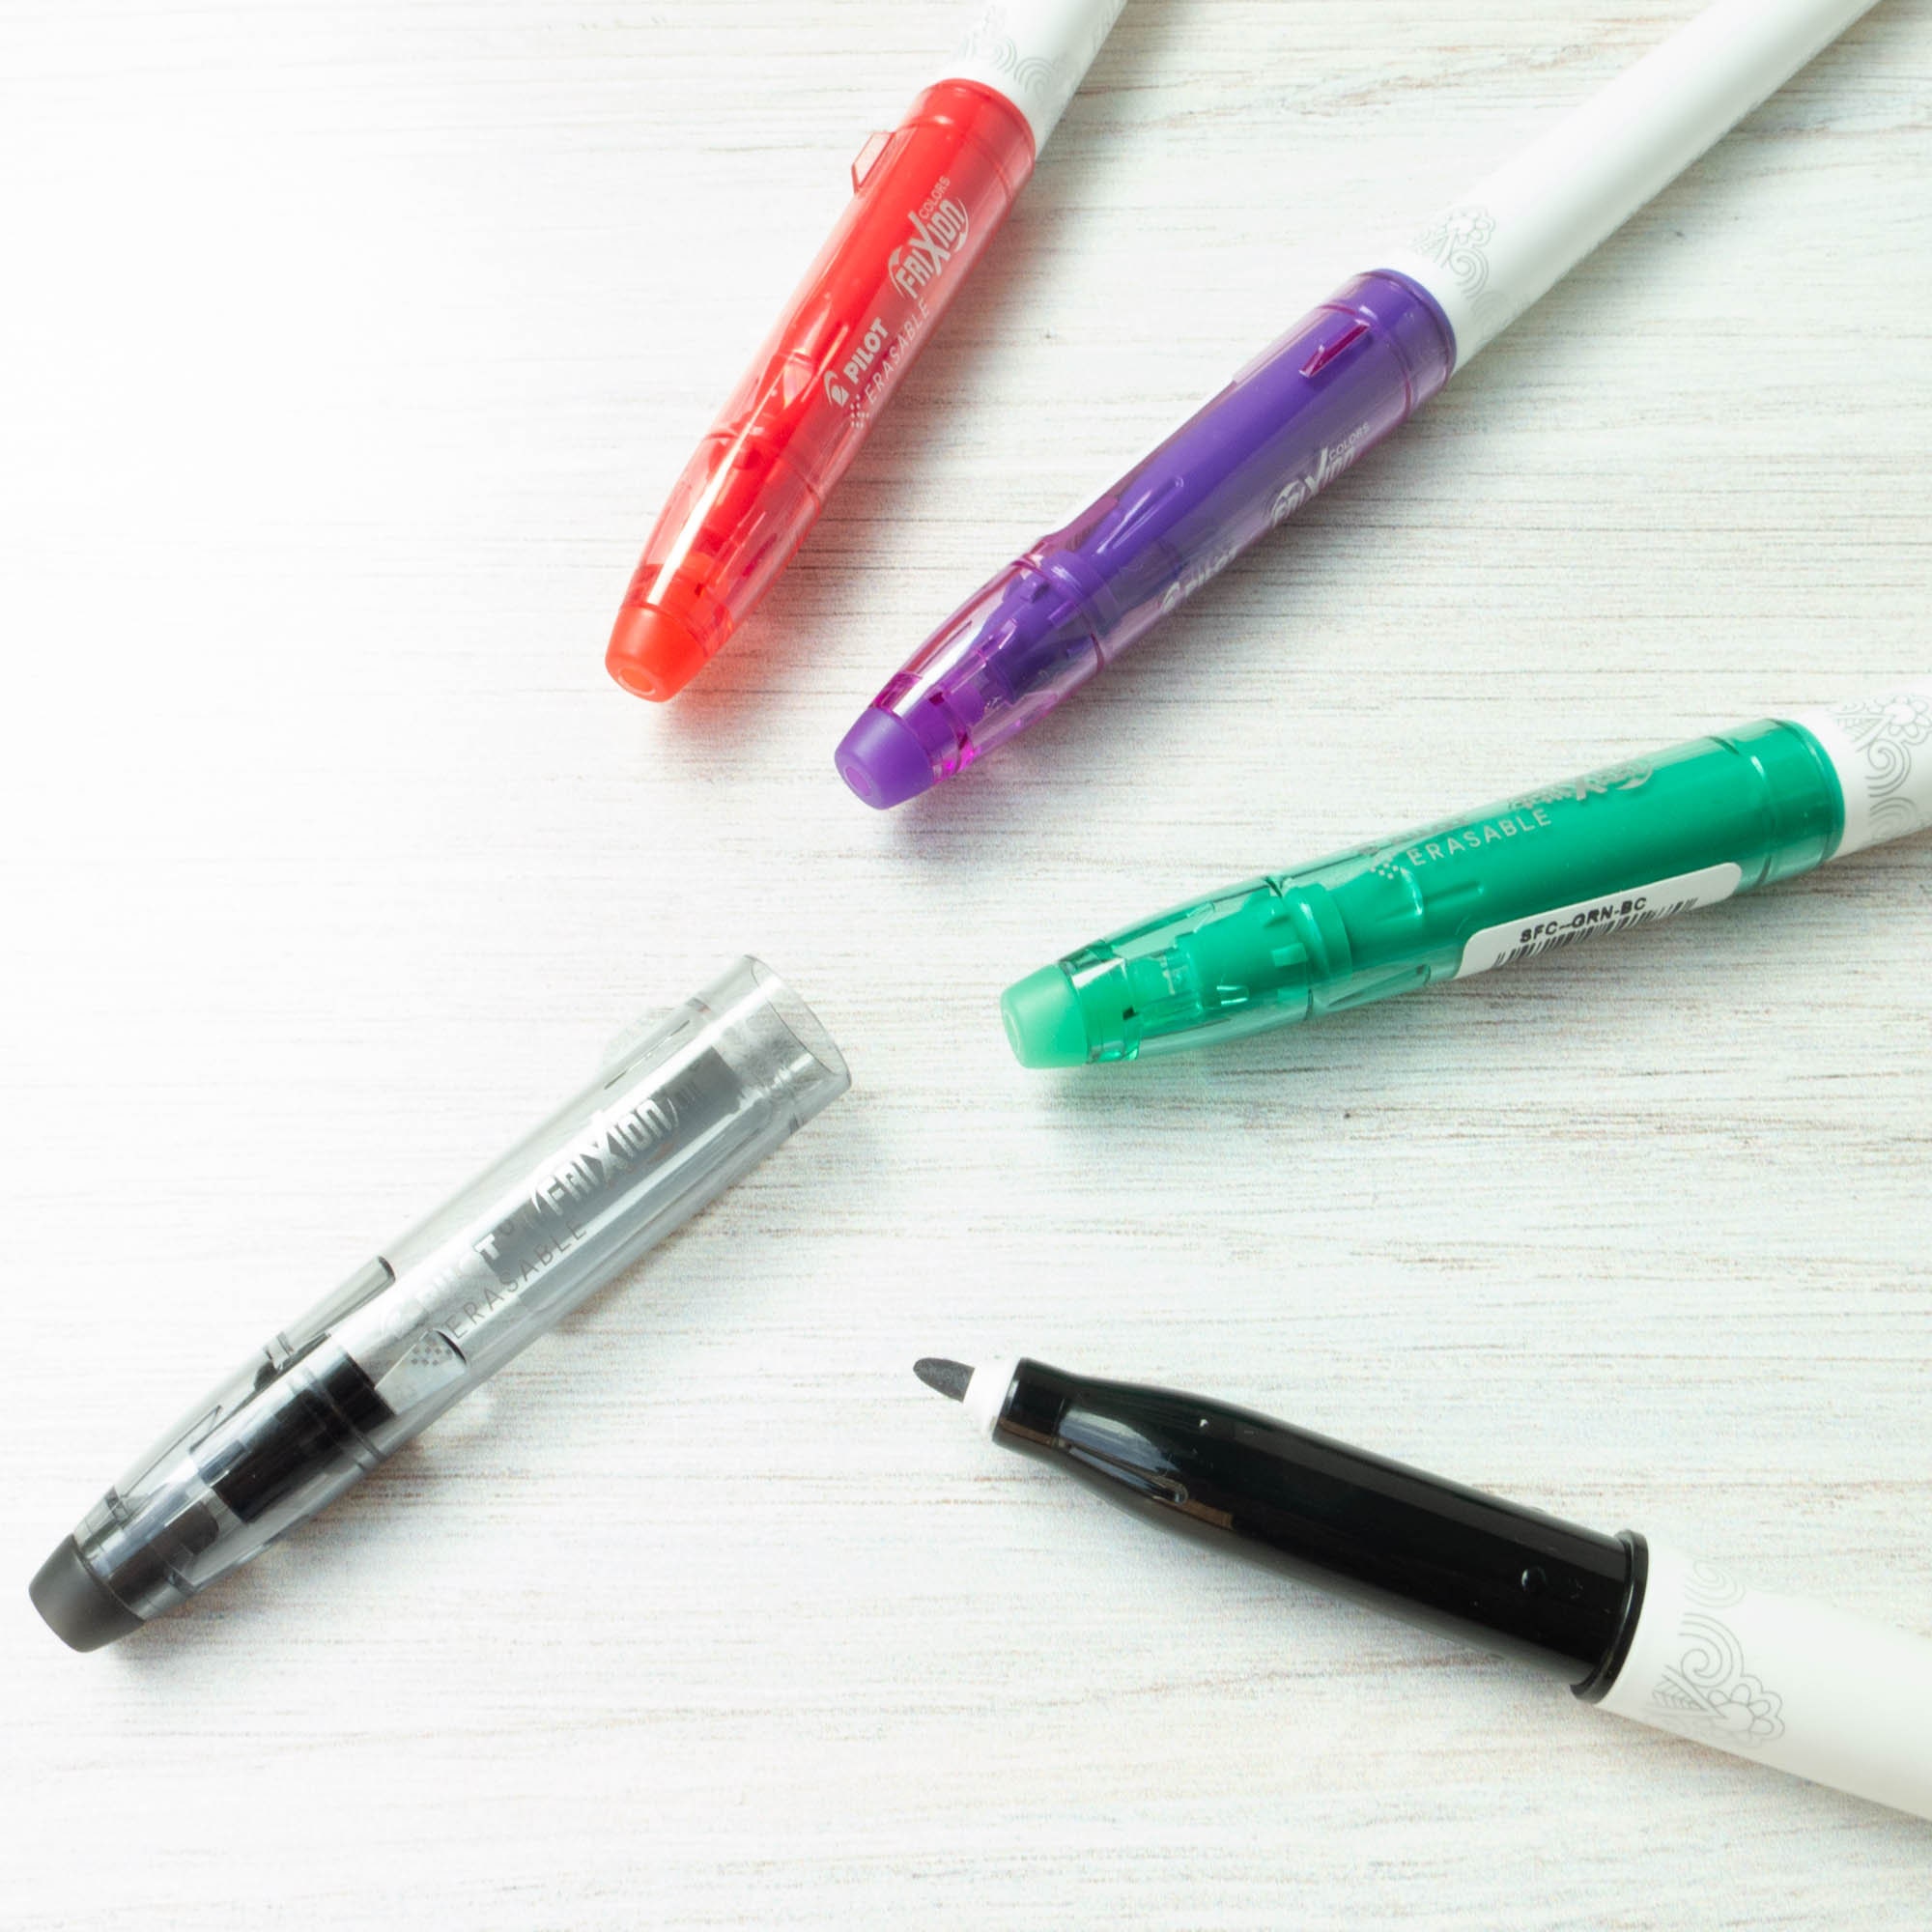 Frixion Pen, Hand Embroidery Transfer Pen, Erasable Pen, Pilot Frixion Pen,  Frixion Erasable Pen 